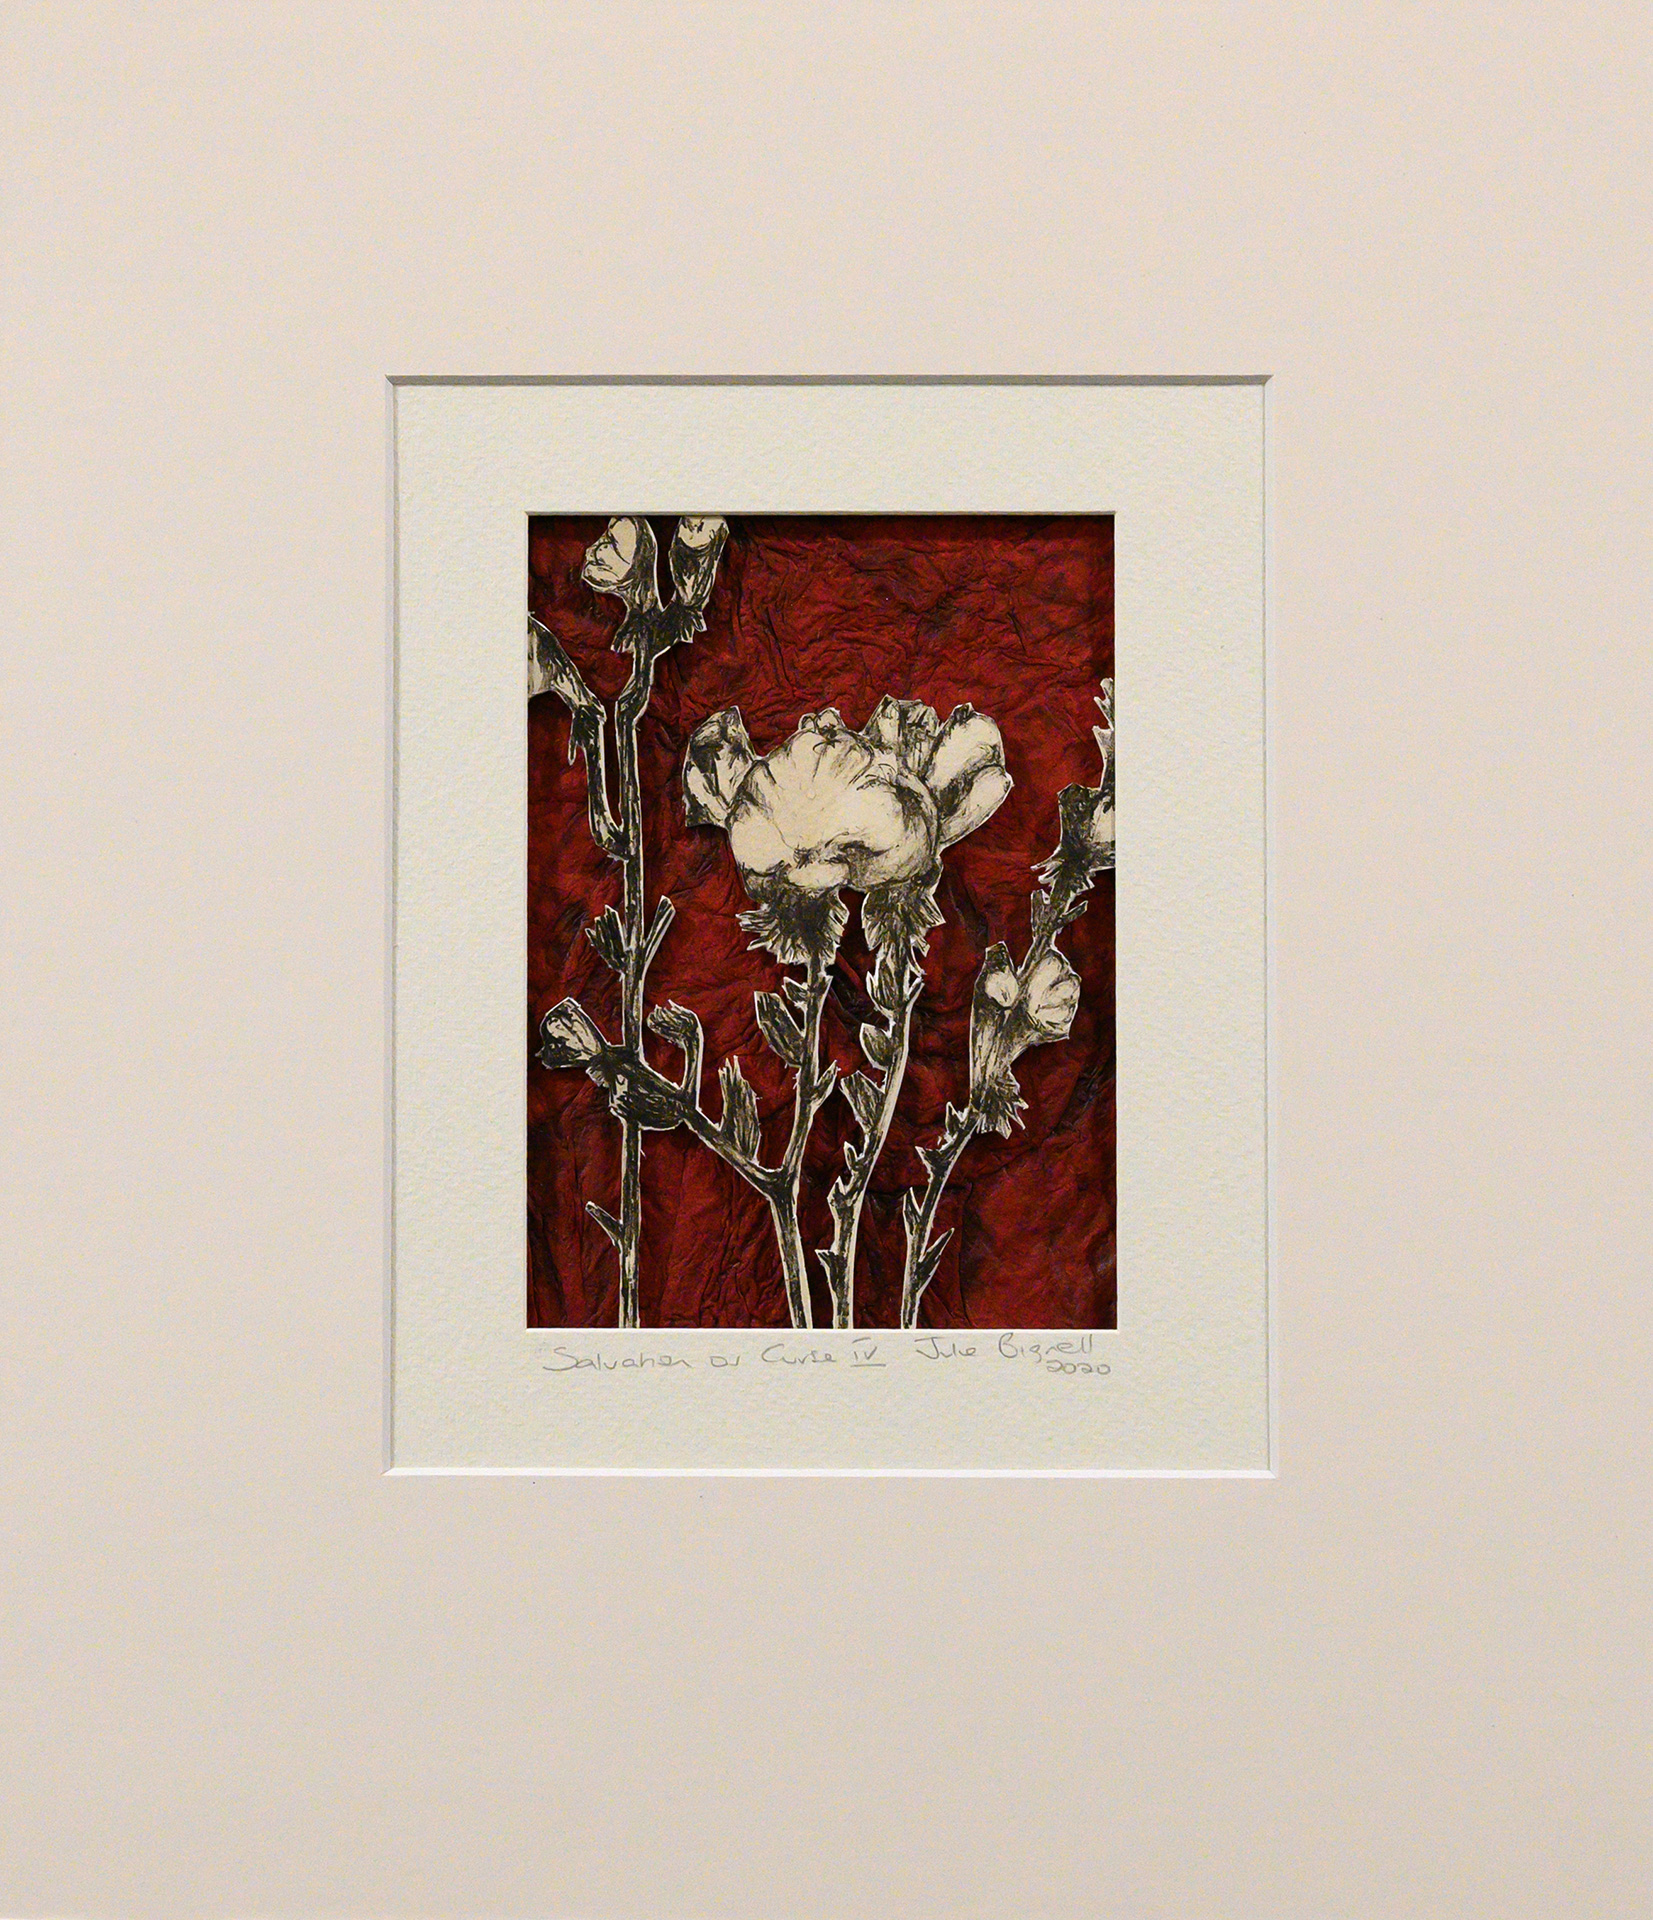 Unframed artwork by Julie Bignell of b&w flowers cut out in the foreground with textured dark red coloured paper in the background